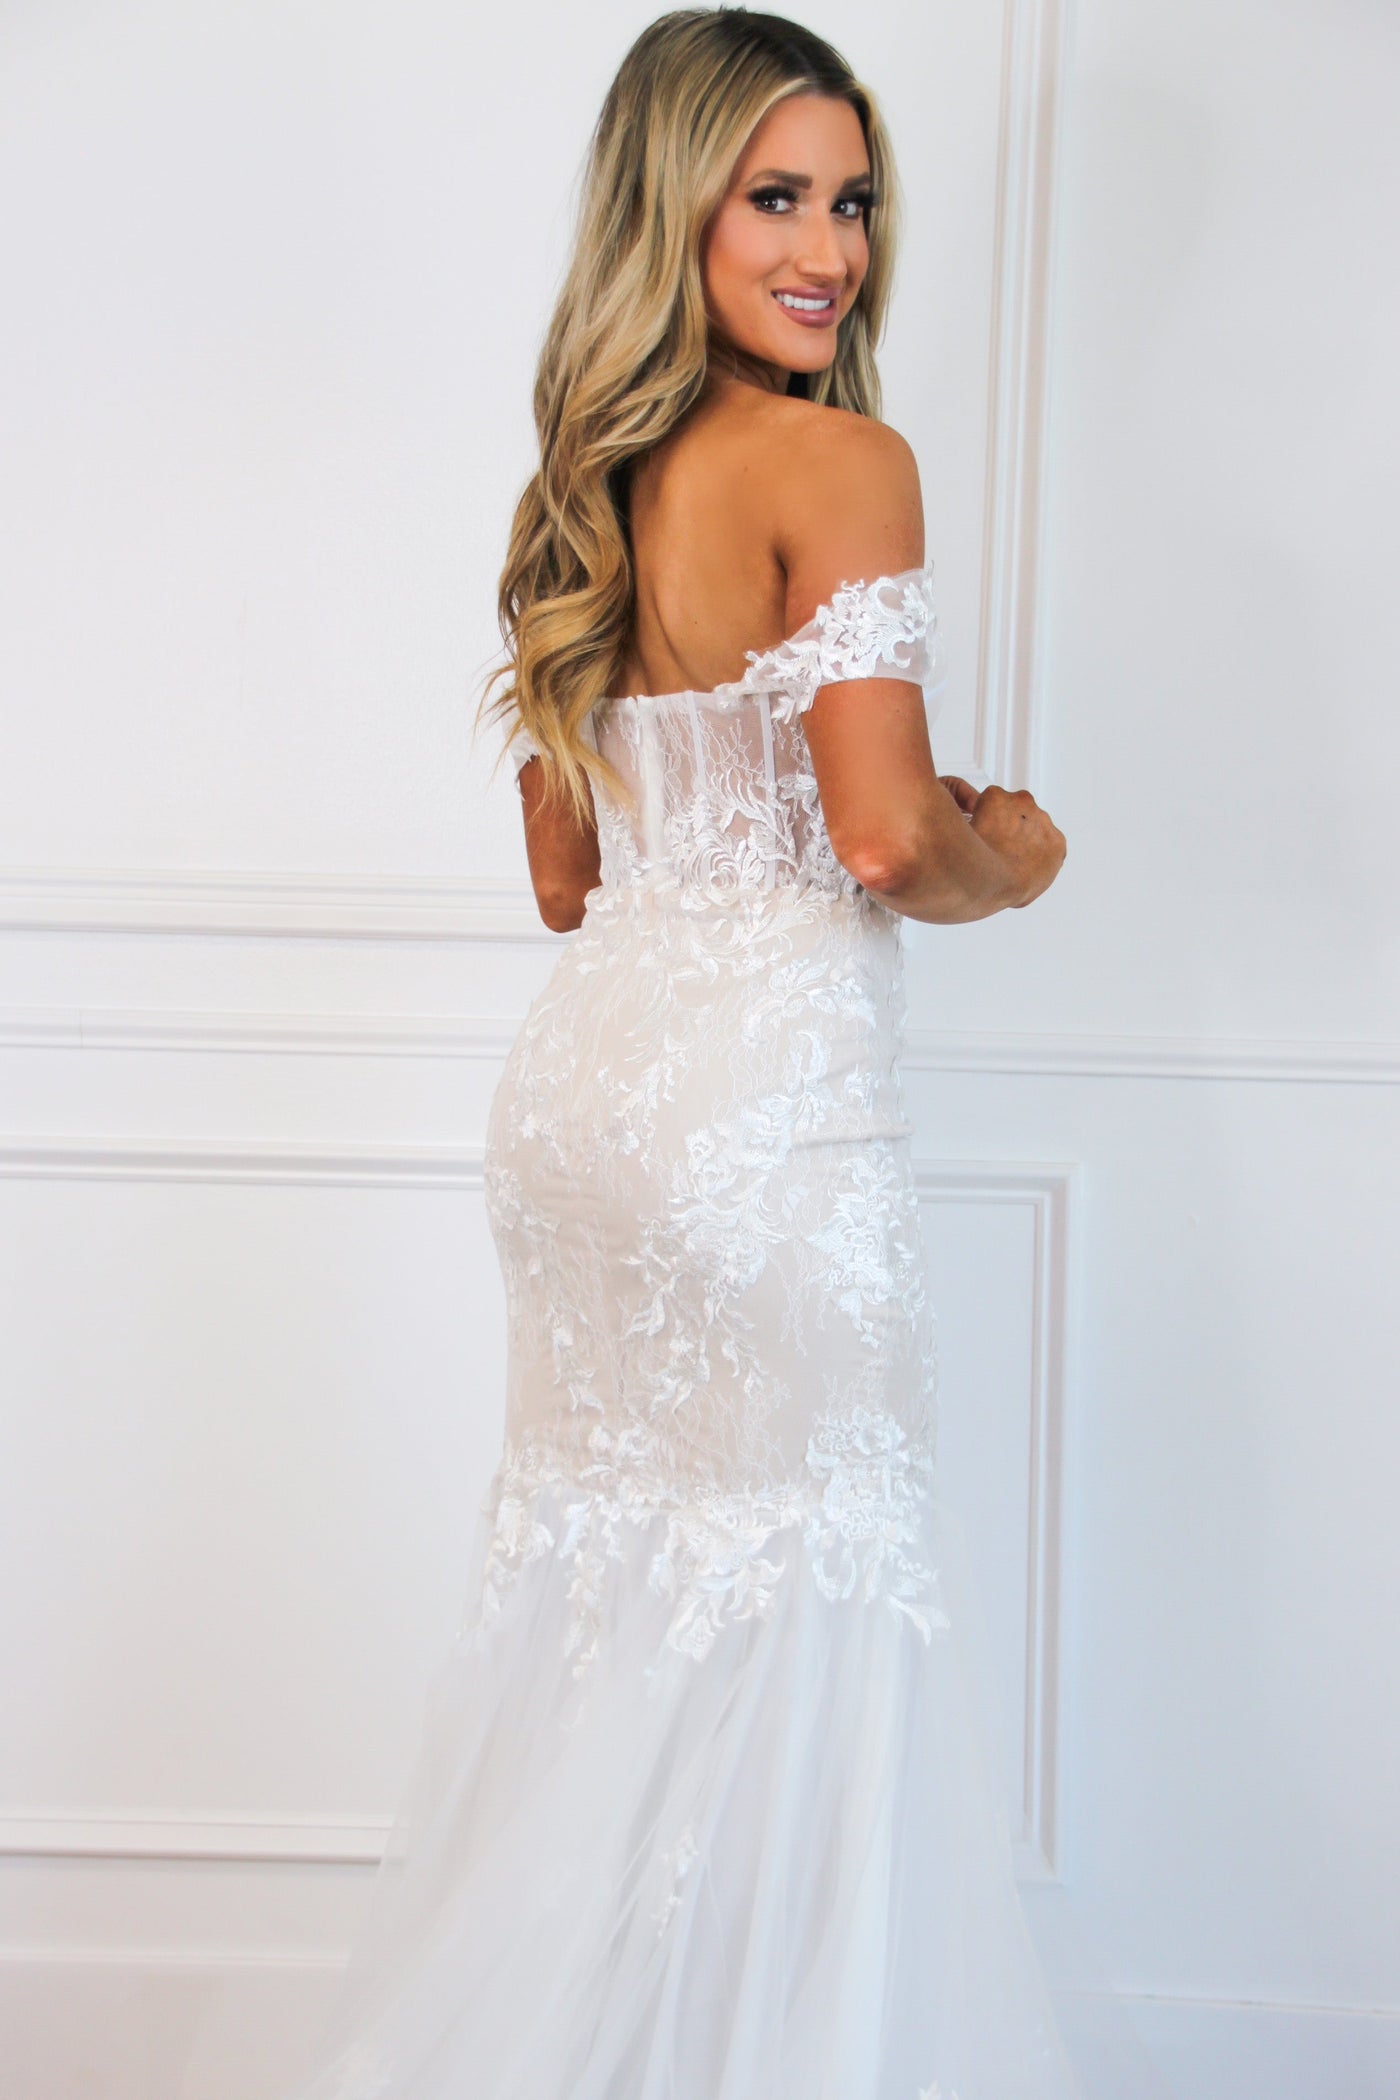 Born to Love You Lace Wedding Mermaid Dress: Ivory/Champagne - Bella and Bloom Boutique